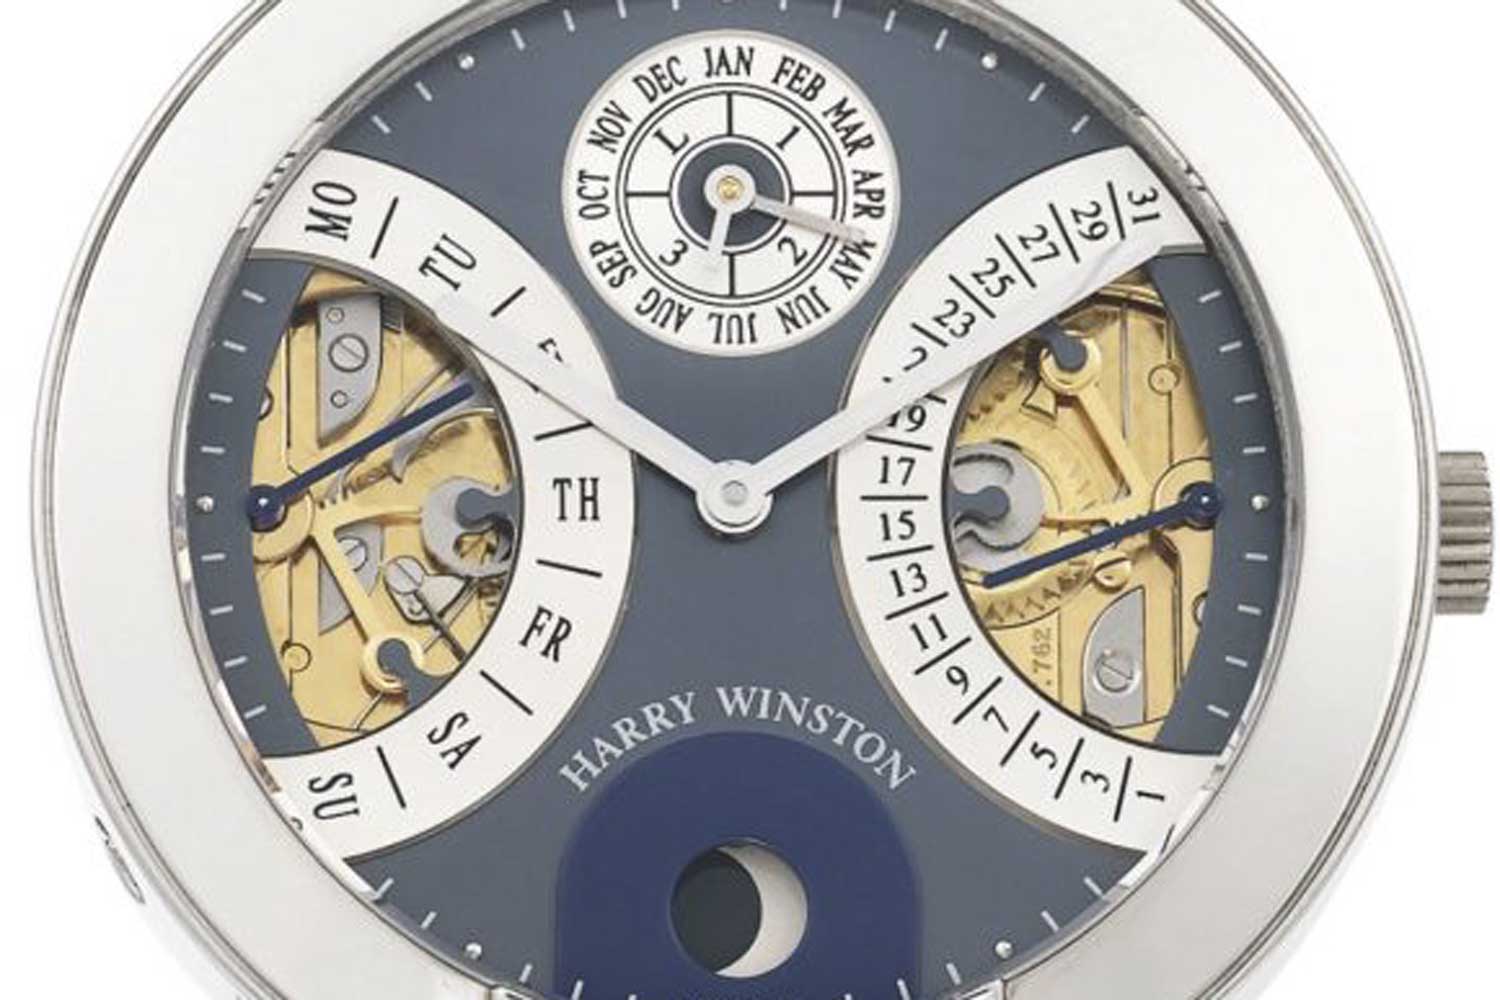 The double retrograde mechanism developed by Roger Dubuis and Jean-Marc Wiederrecht